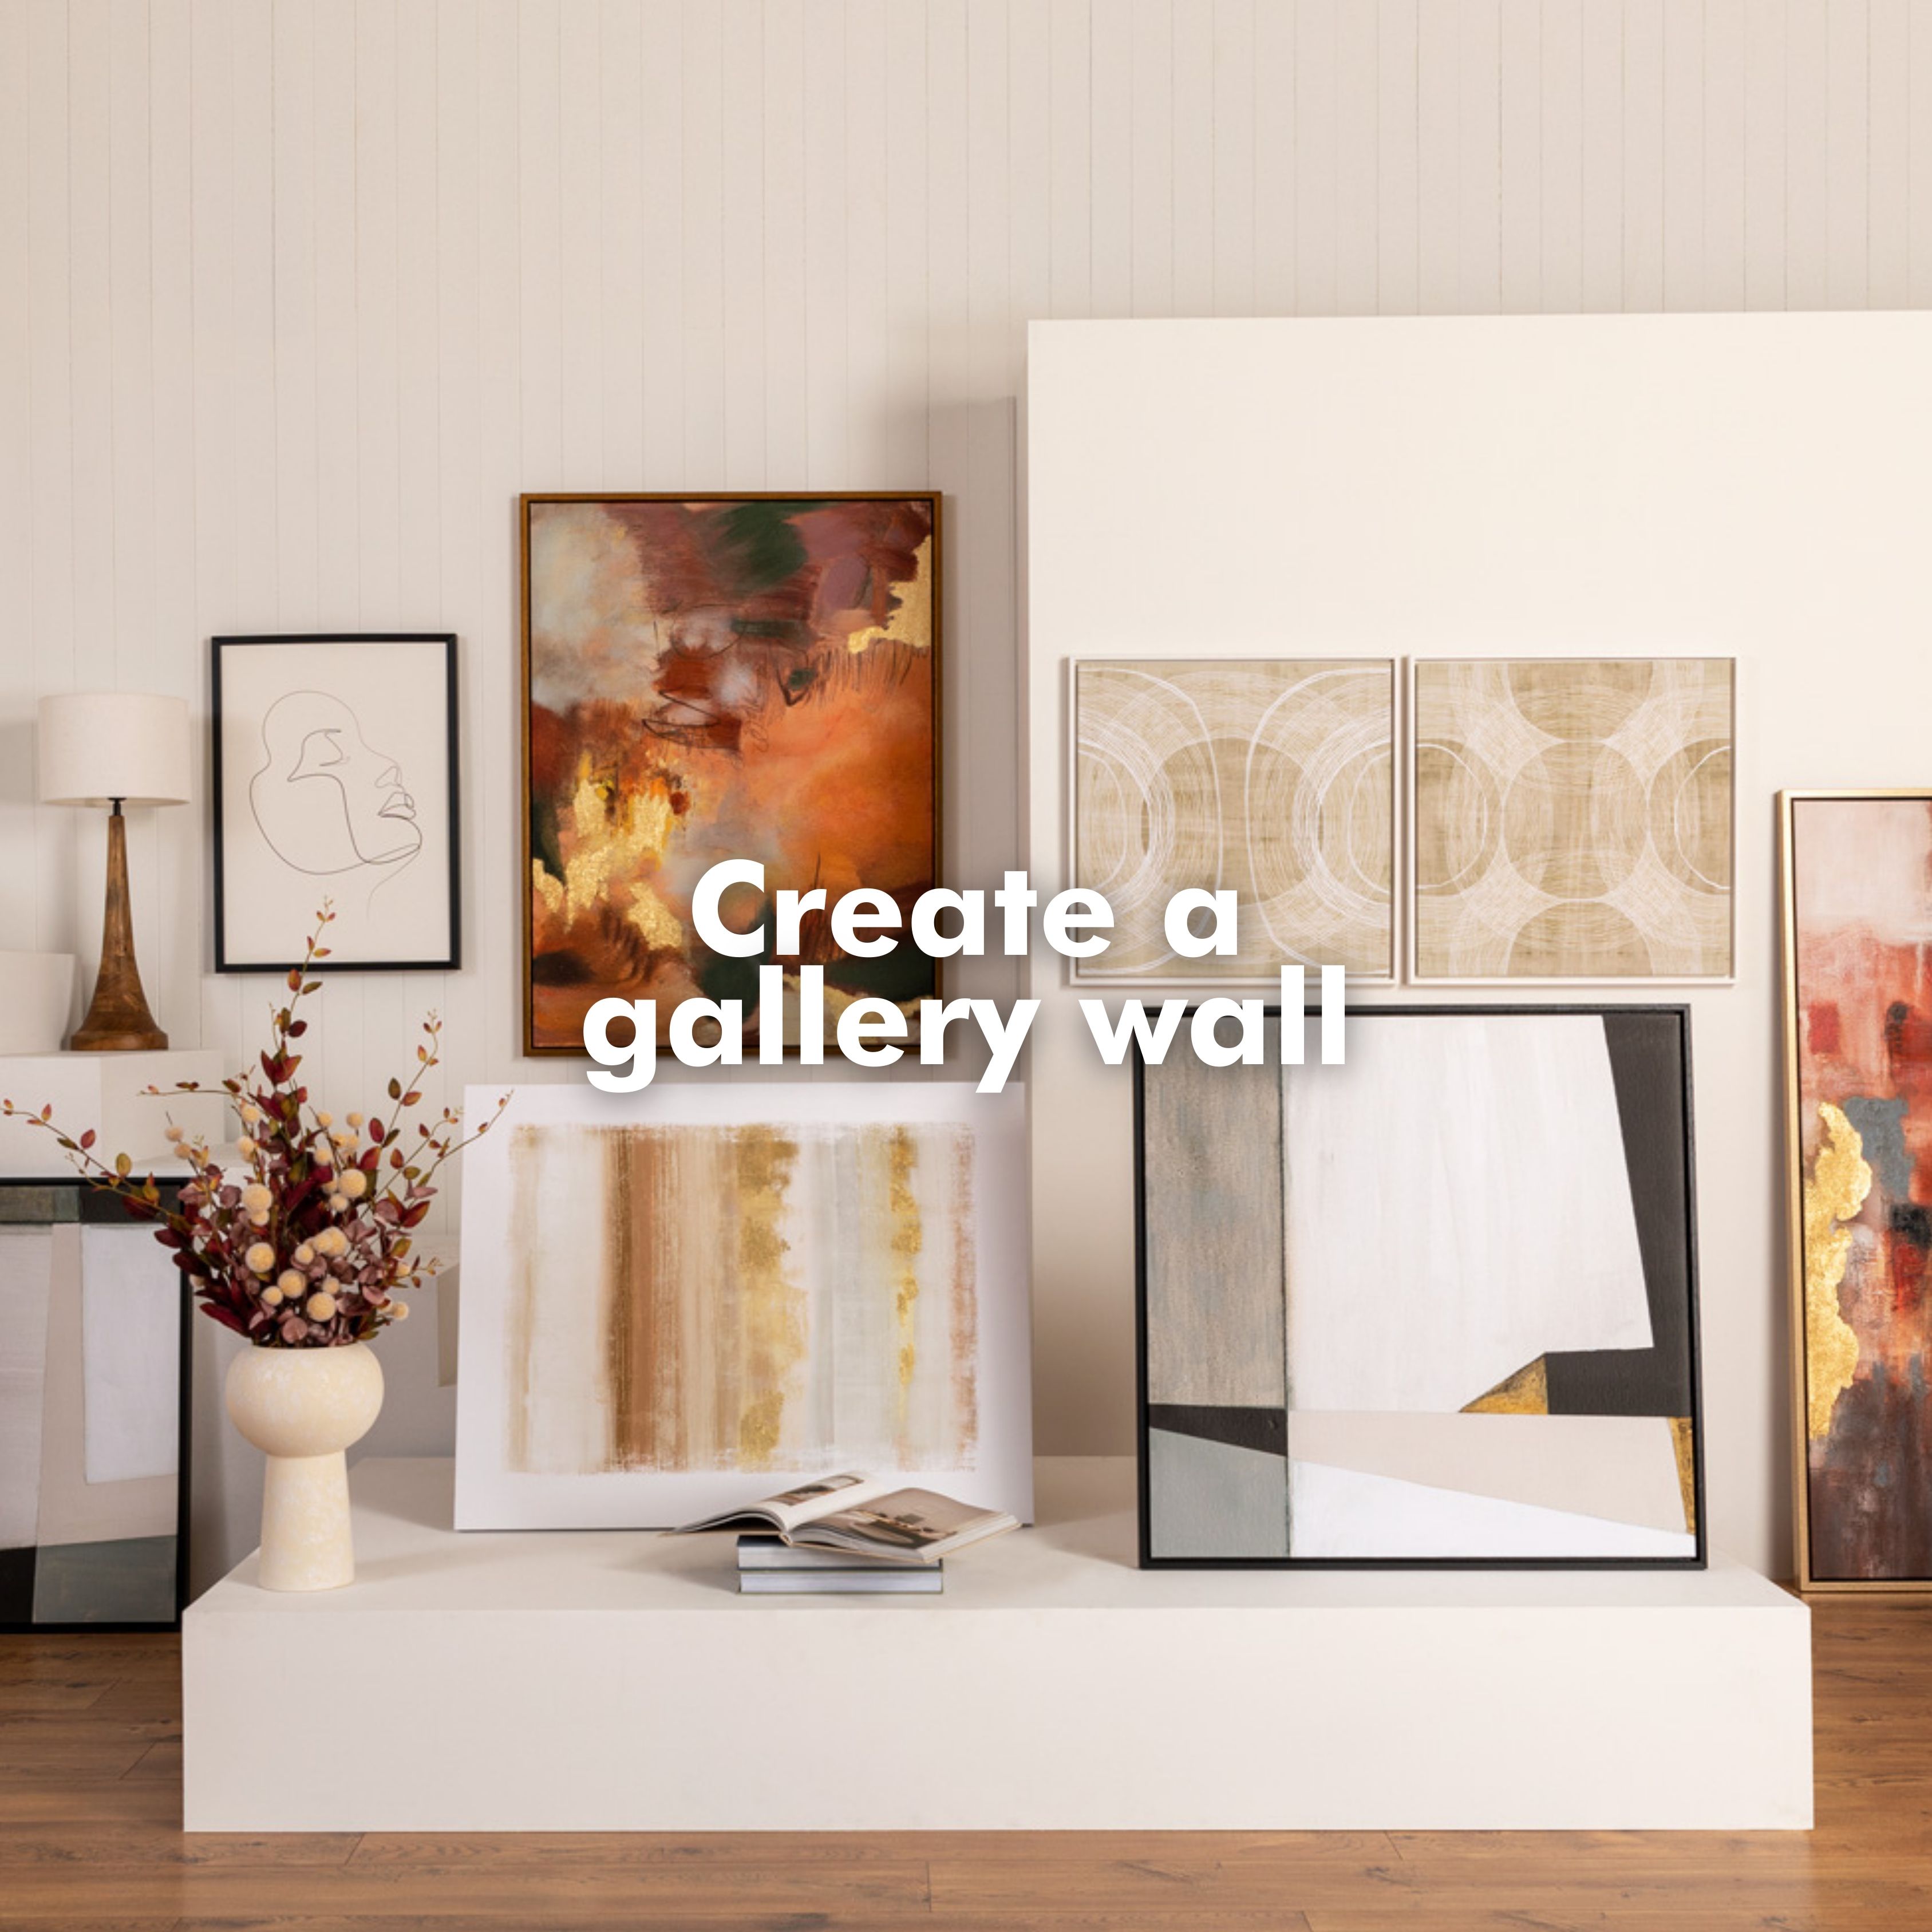 Design-a-gallery-wall